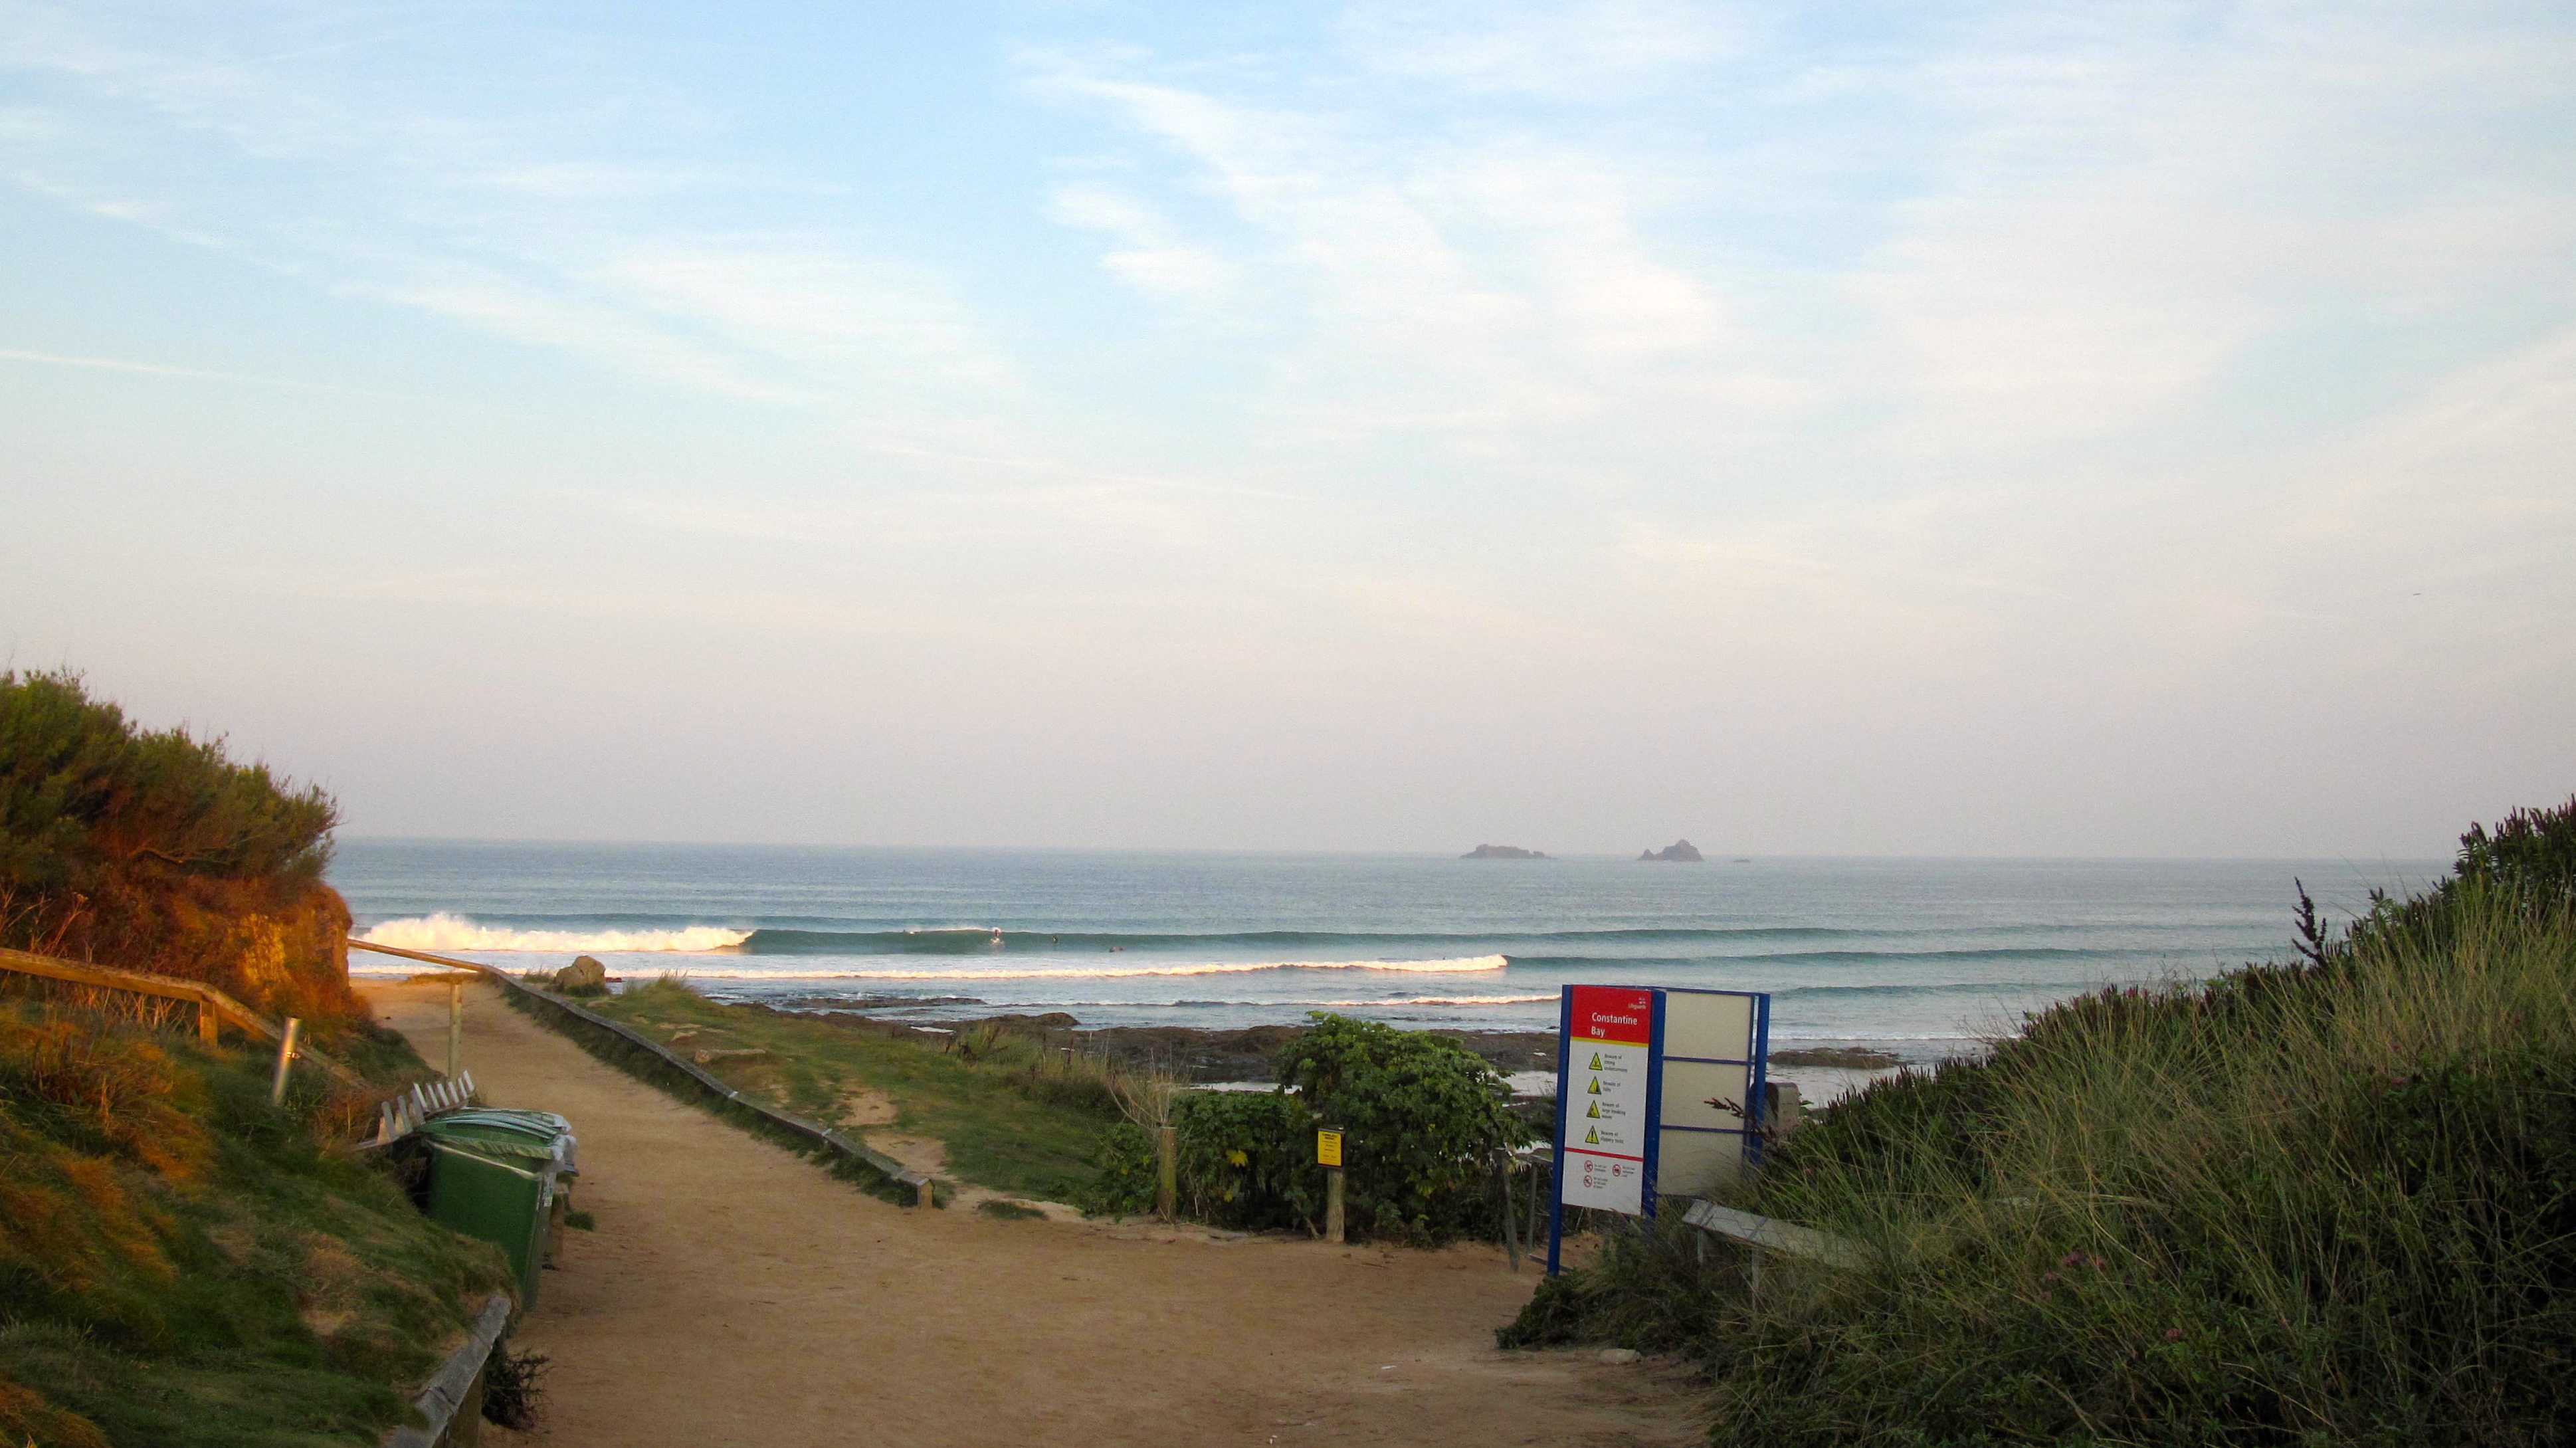 Surf Report for Monday 22nd September 2014